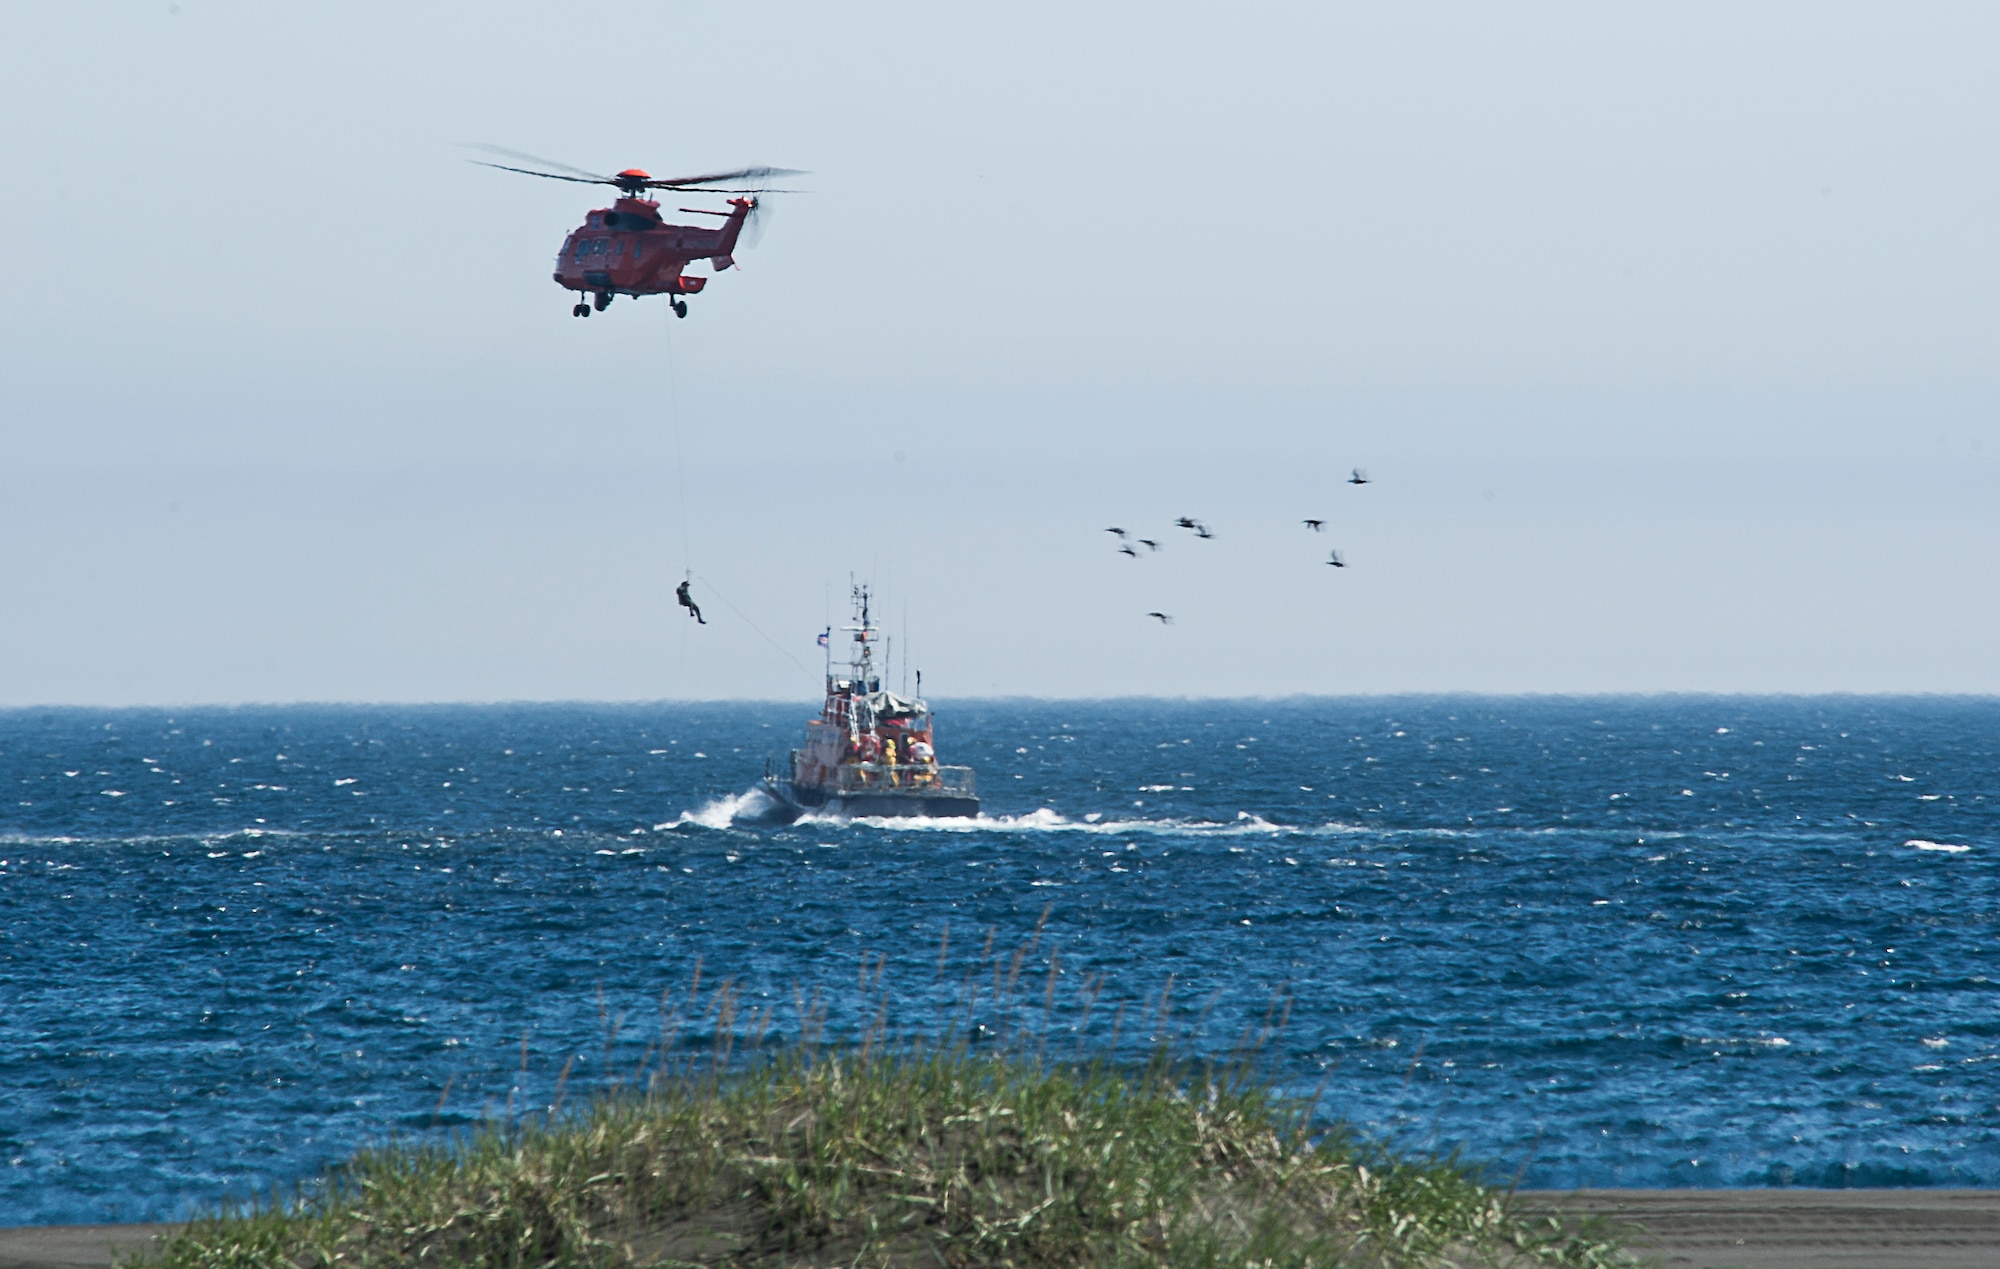 A U.S. Air Force pararescuman descends from an Icelandic Super Puma during a ceremony May 30, 2014, commemorating a rescue mission on the coastline of Voldlavik, Iceland. During the mission, U.S. Airmen saved the lives of six Icelanders stranded aboard their ship, the Godinn. (U.S. Air Force photo/Tech. Sgt. Benjamin Wilson)